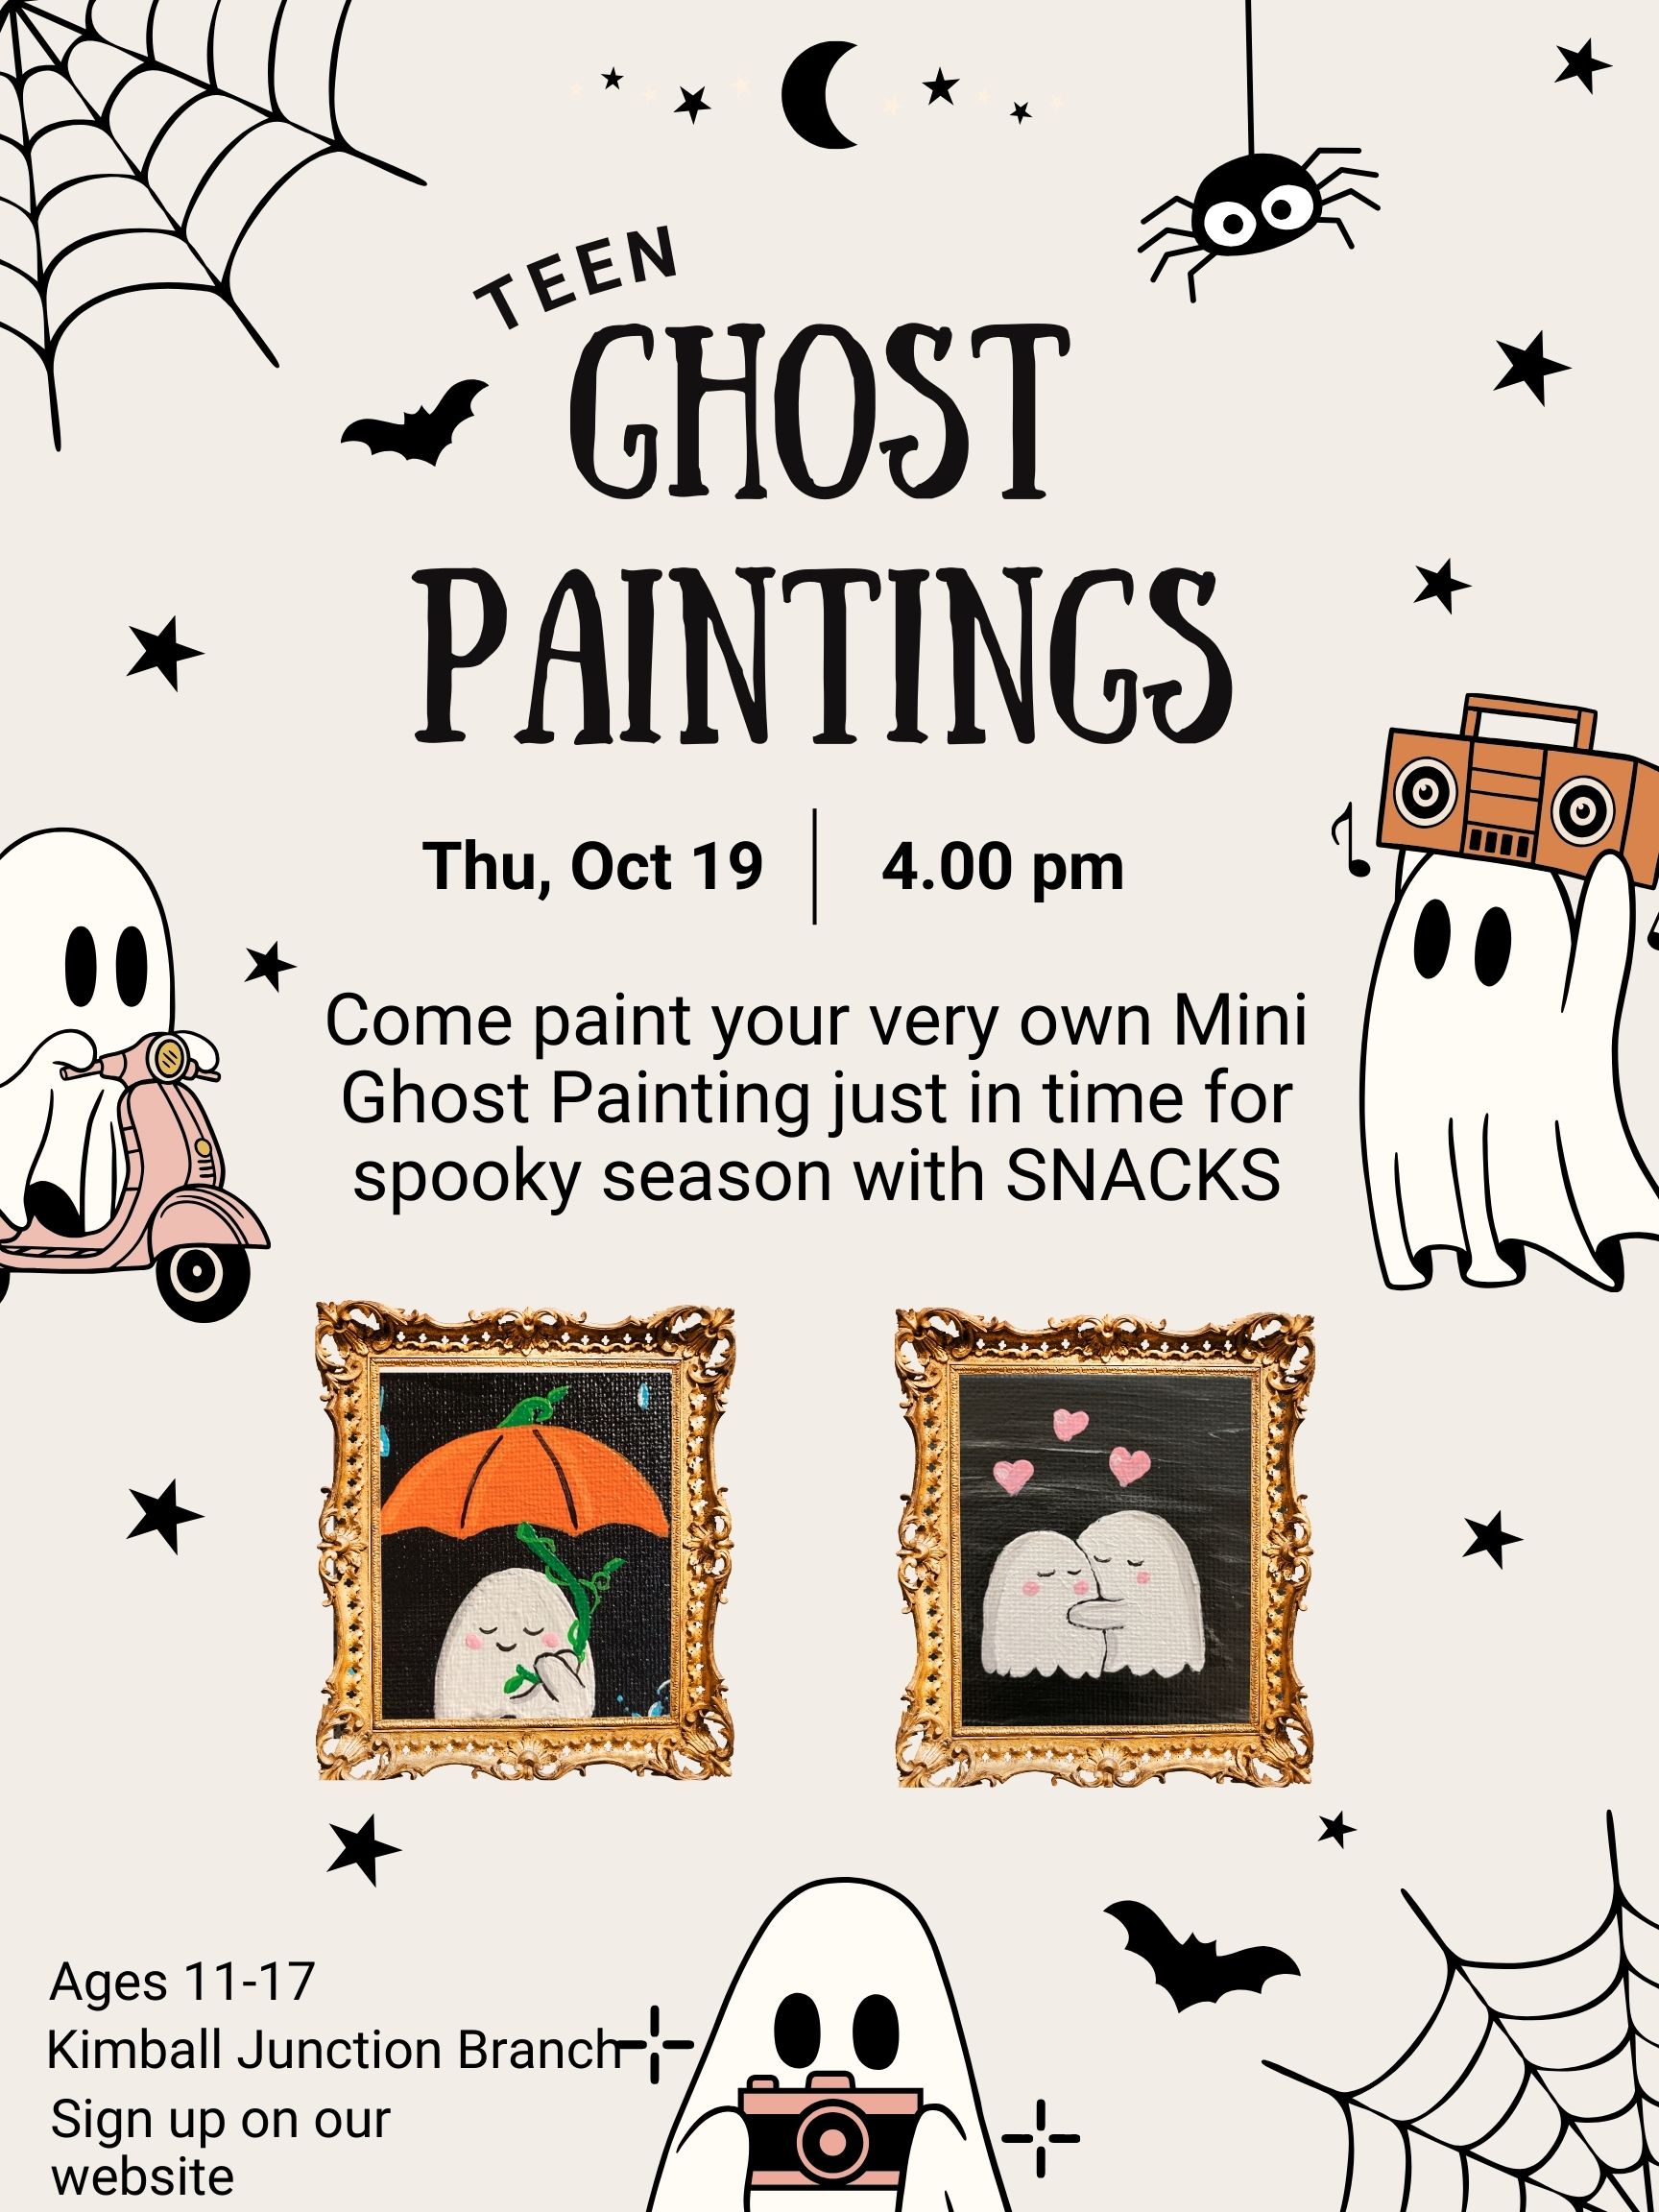 Teen Spooky Ghost Paintings at Kimball Junction